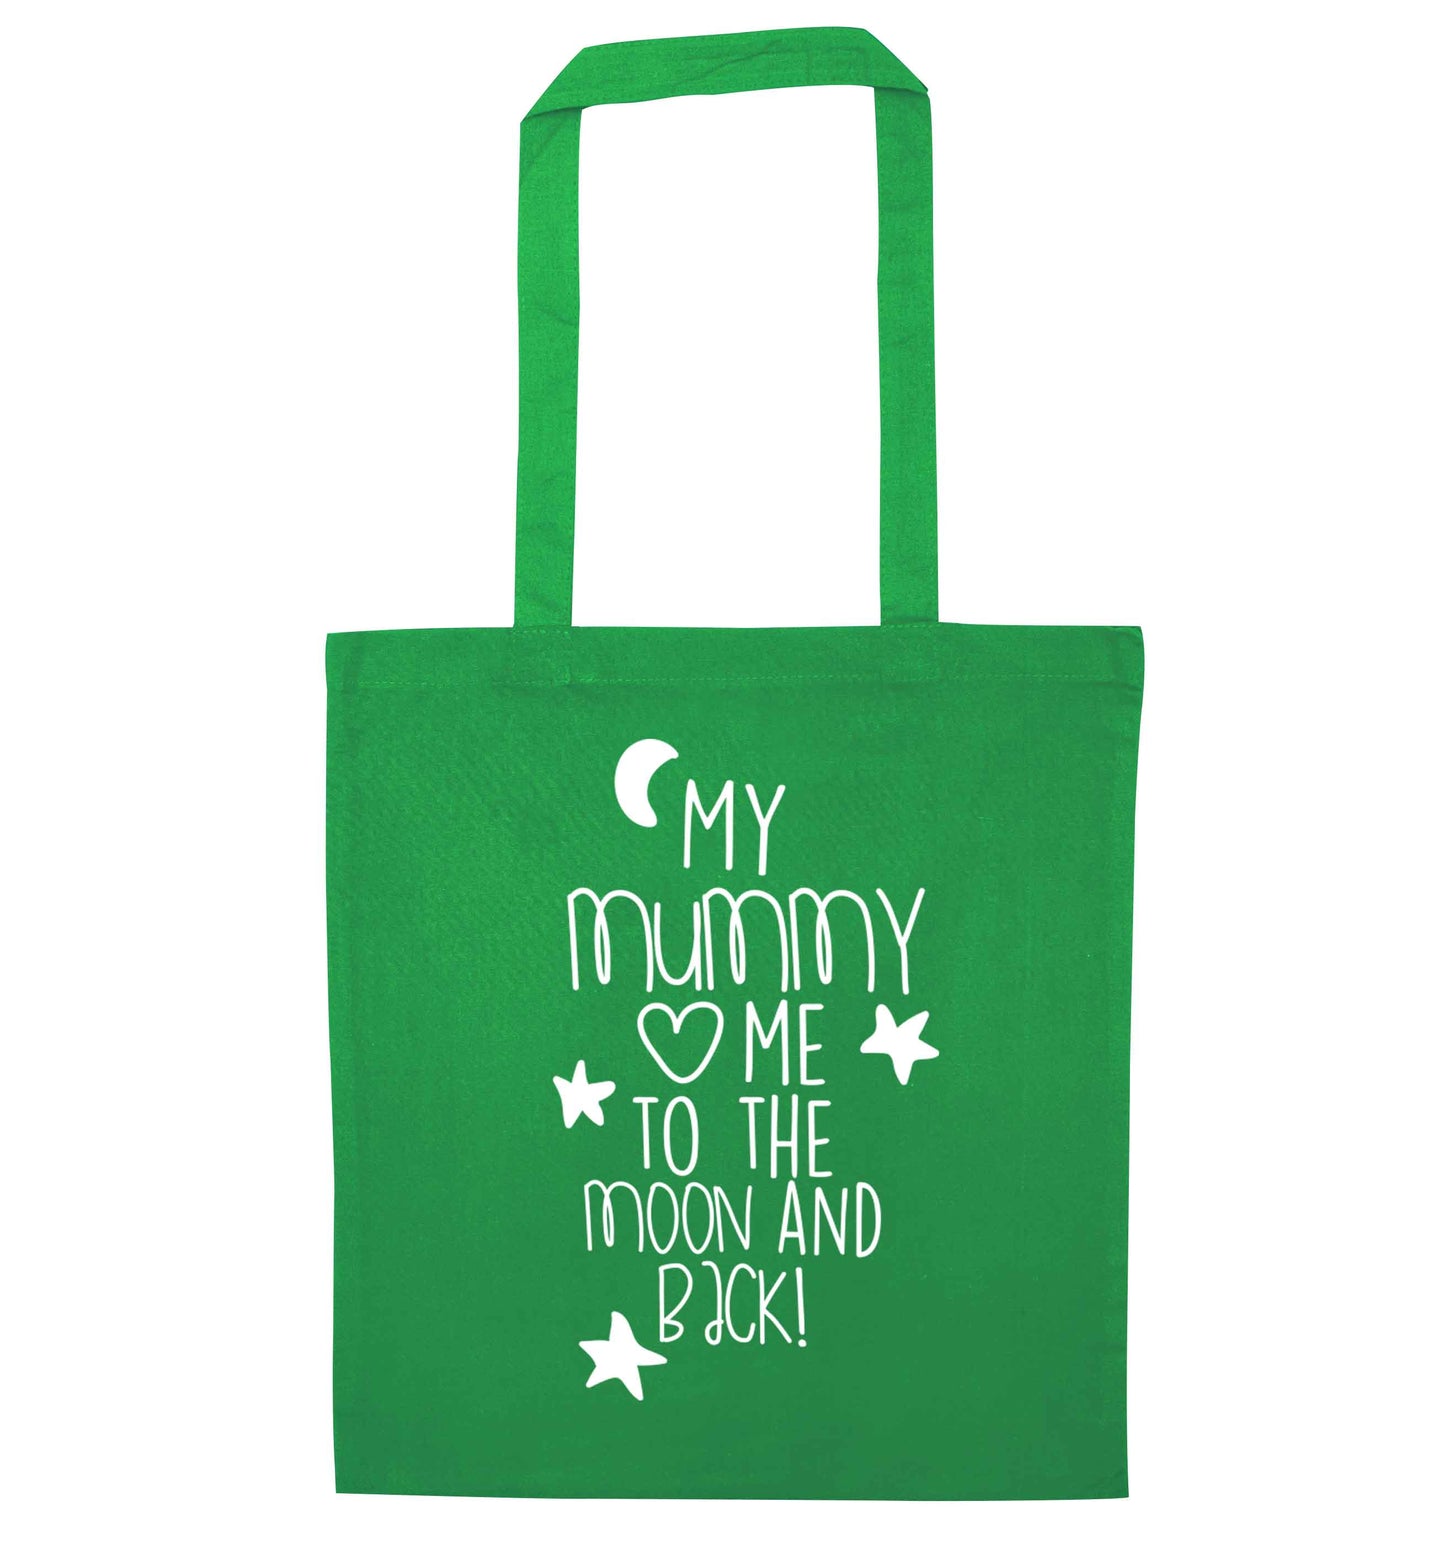 My mum loves me to the moon and back green tote bag